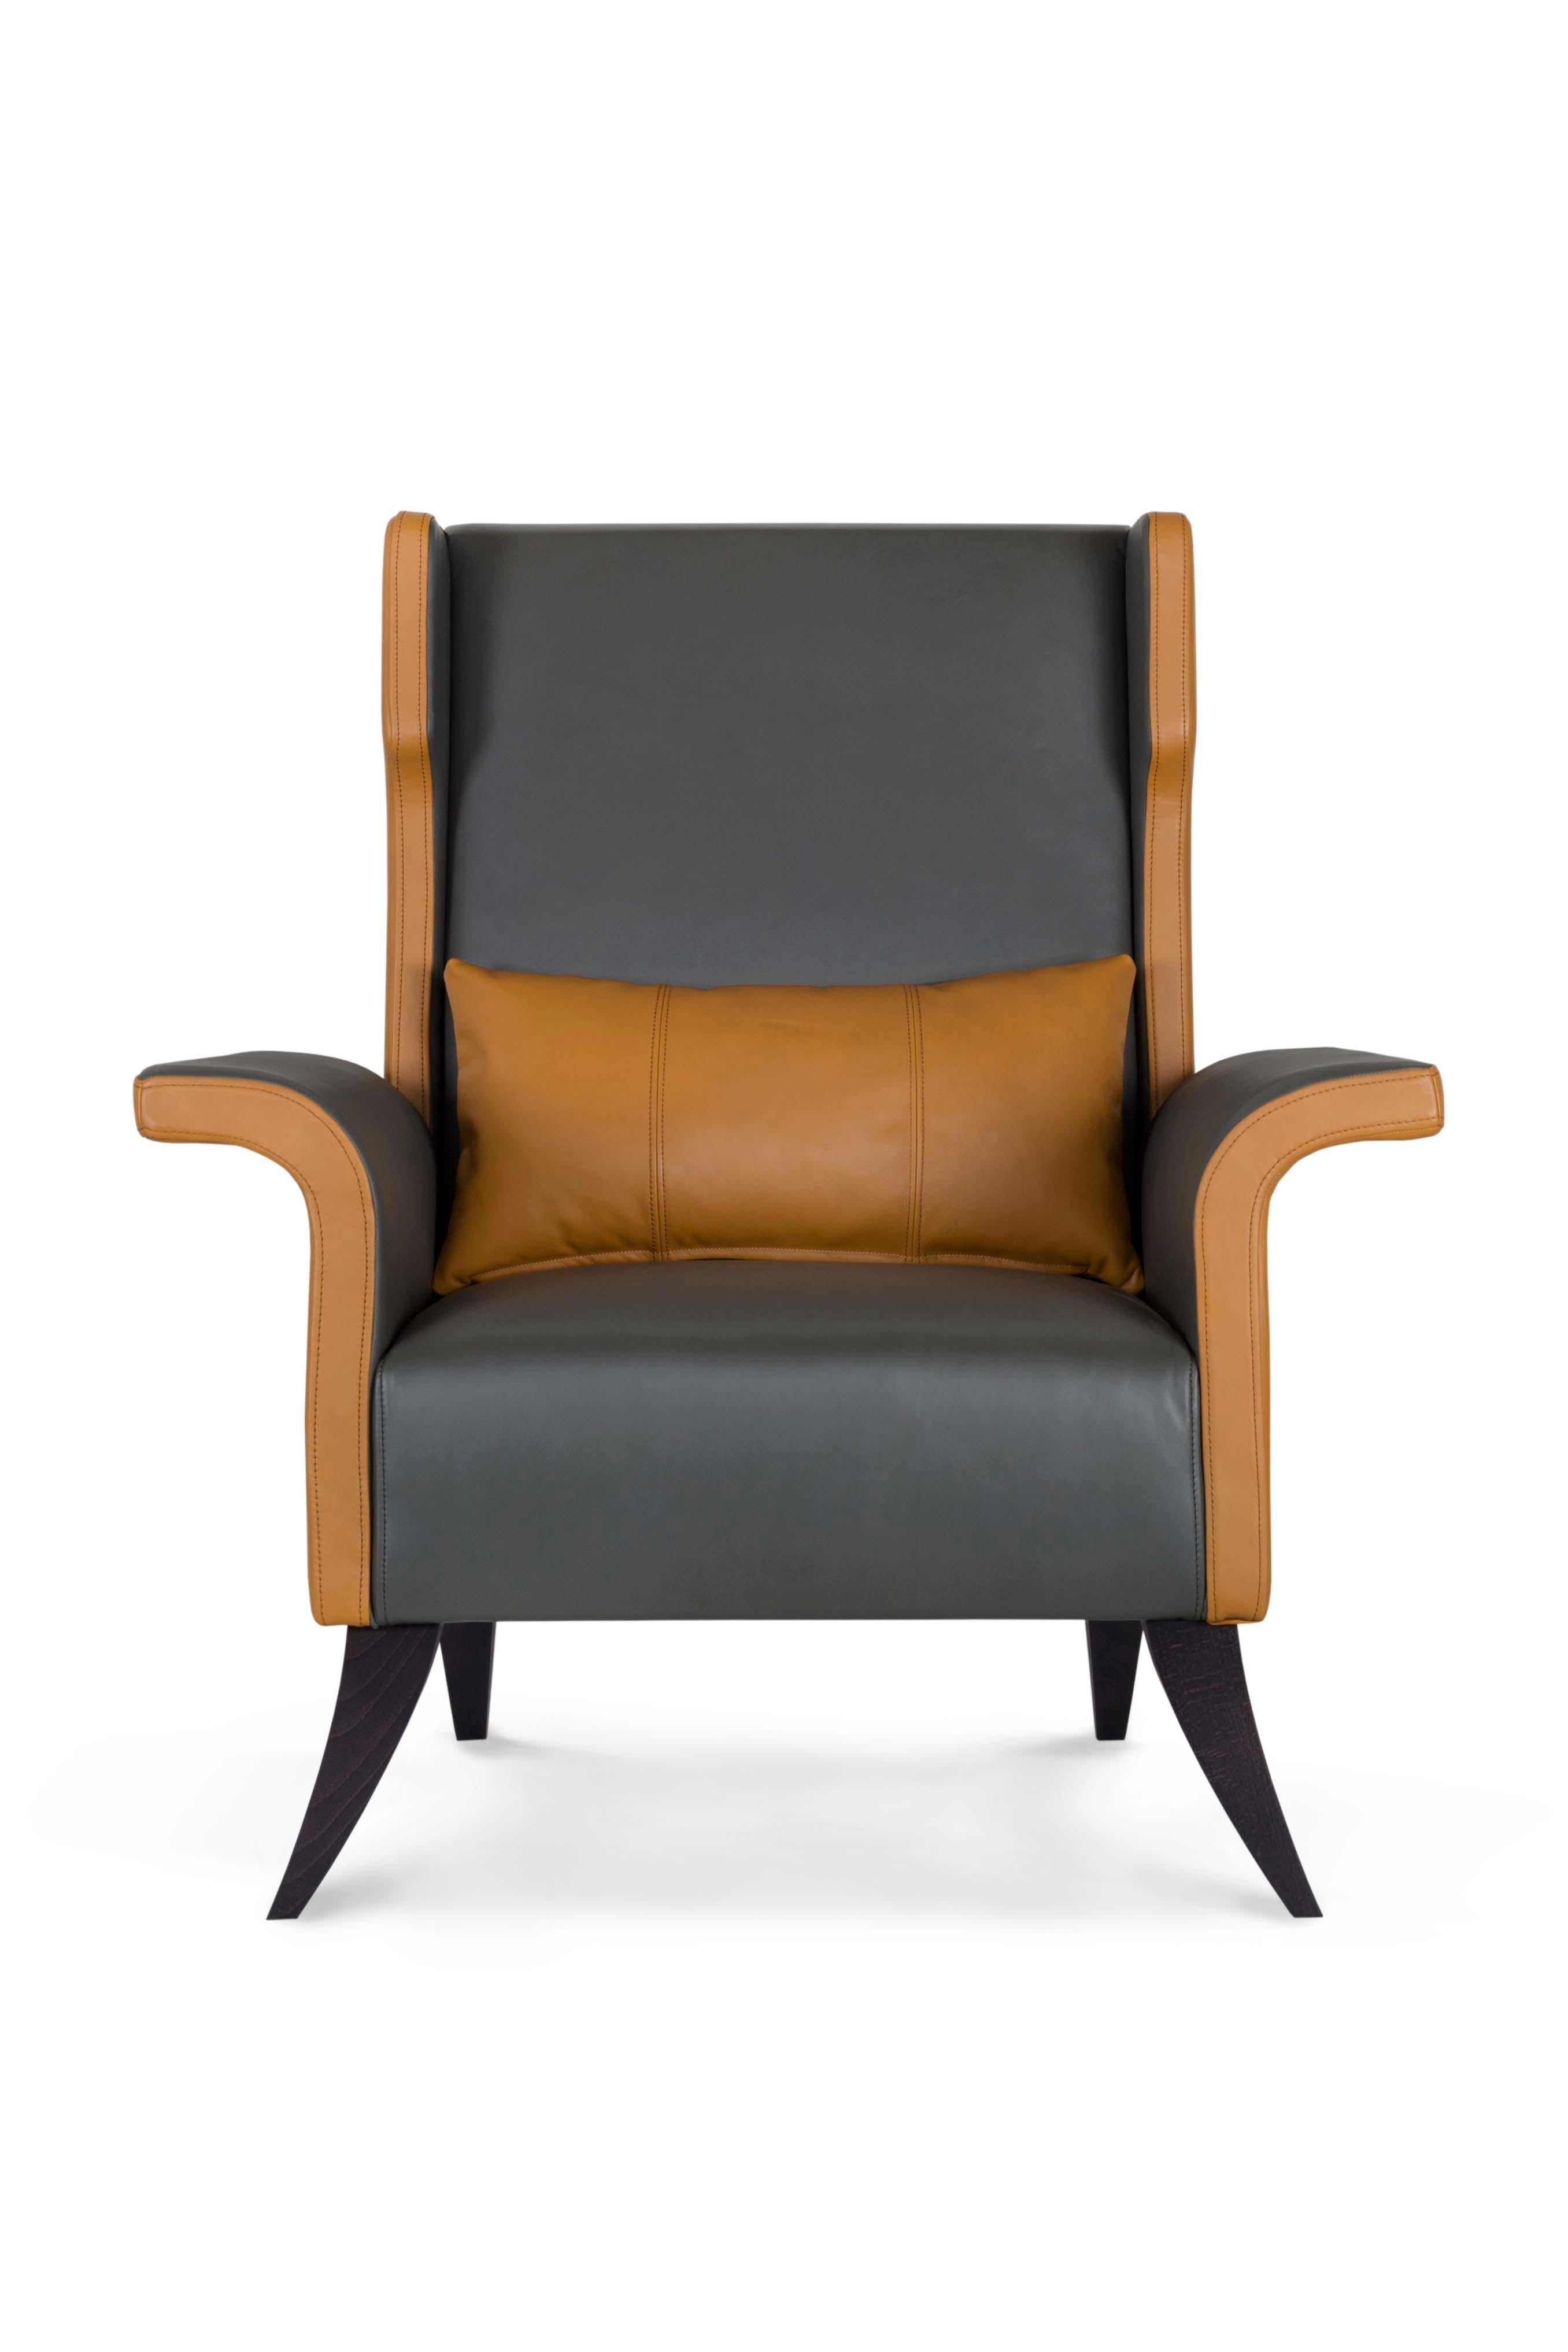 Tile Armchair, Modern Collection, Handcrafted in Portugal - Europe by GF Modern.

Built with the best materials and skilled craftsmanship, this high-end modern classic wooden armchair is a segment reference. Designed to provide comfortable moments,